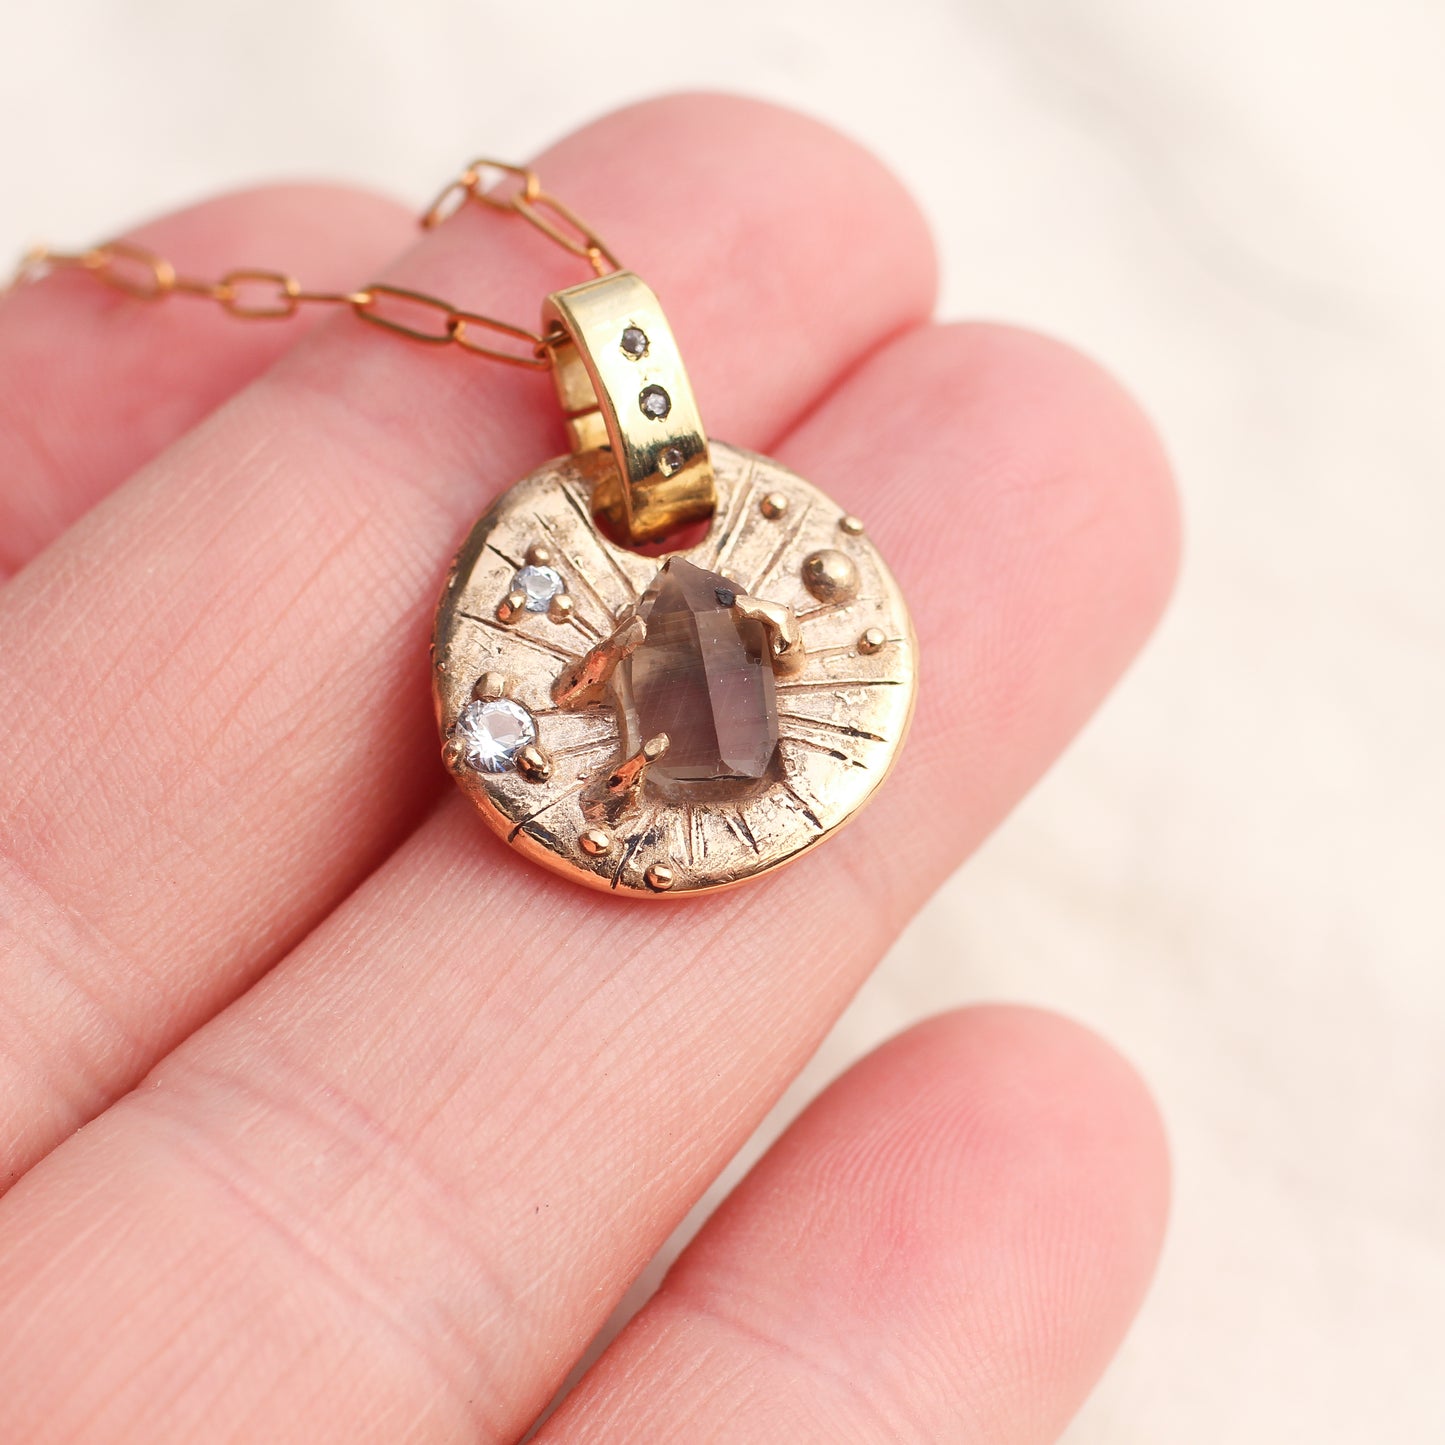 Raw Smoky Quartz and faceted Topaz Star Chart necklace